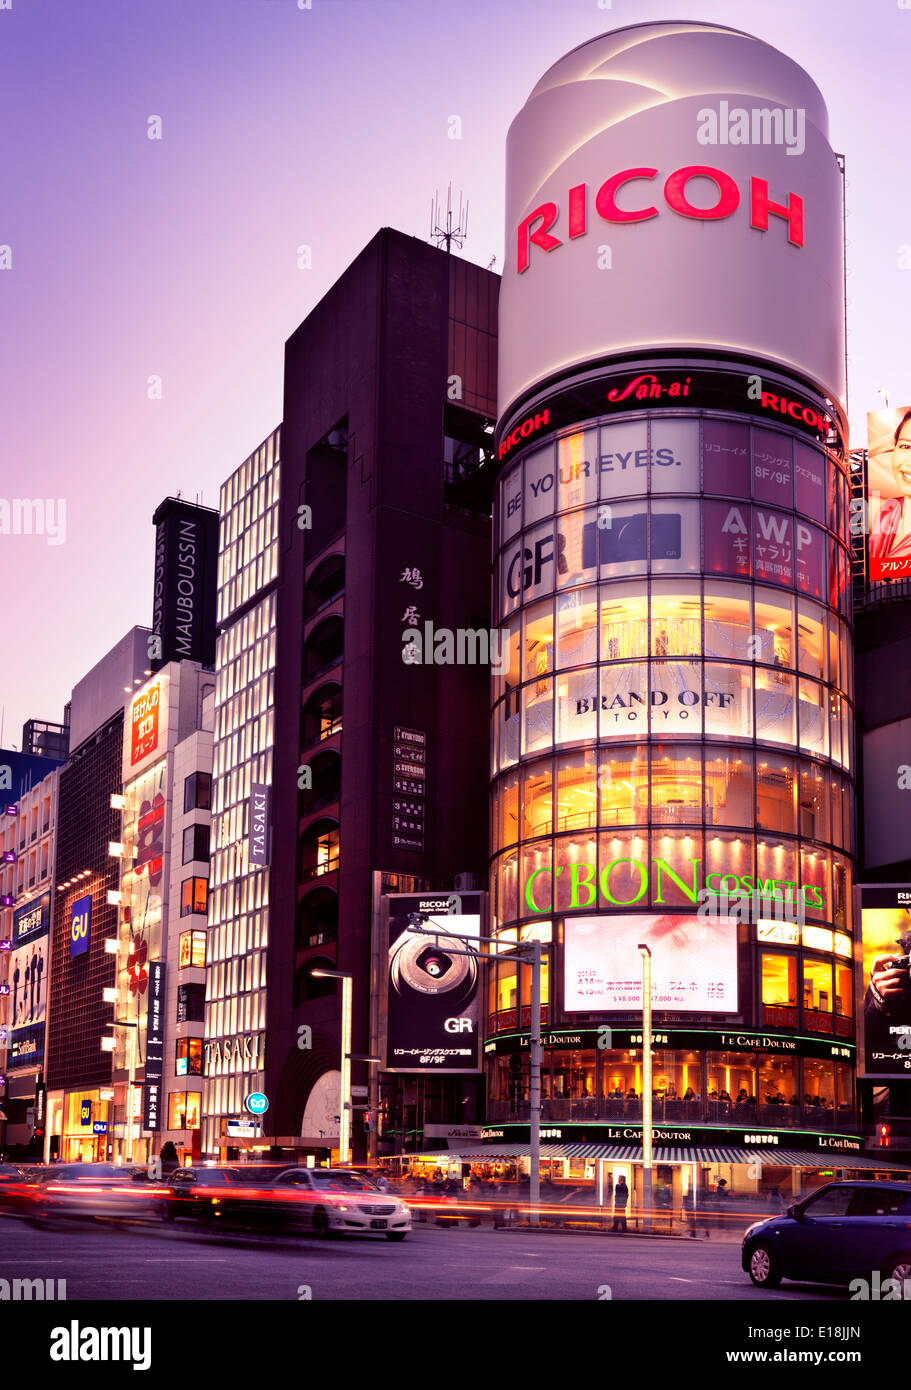 Ricoh building and colorful signs on Chuo Dori street at night in Ginza, Tokyo, Japan 2014. Stock Photo